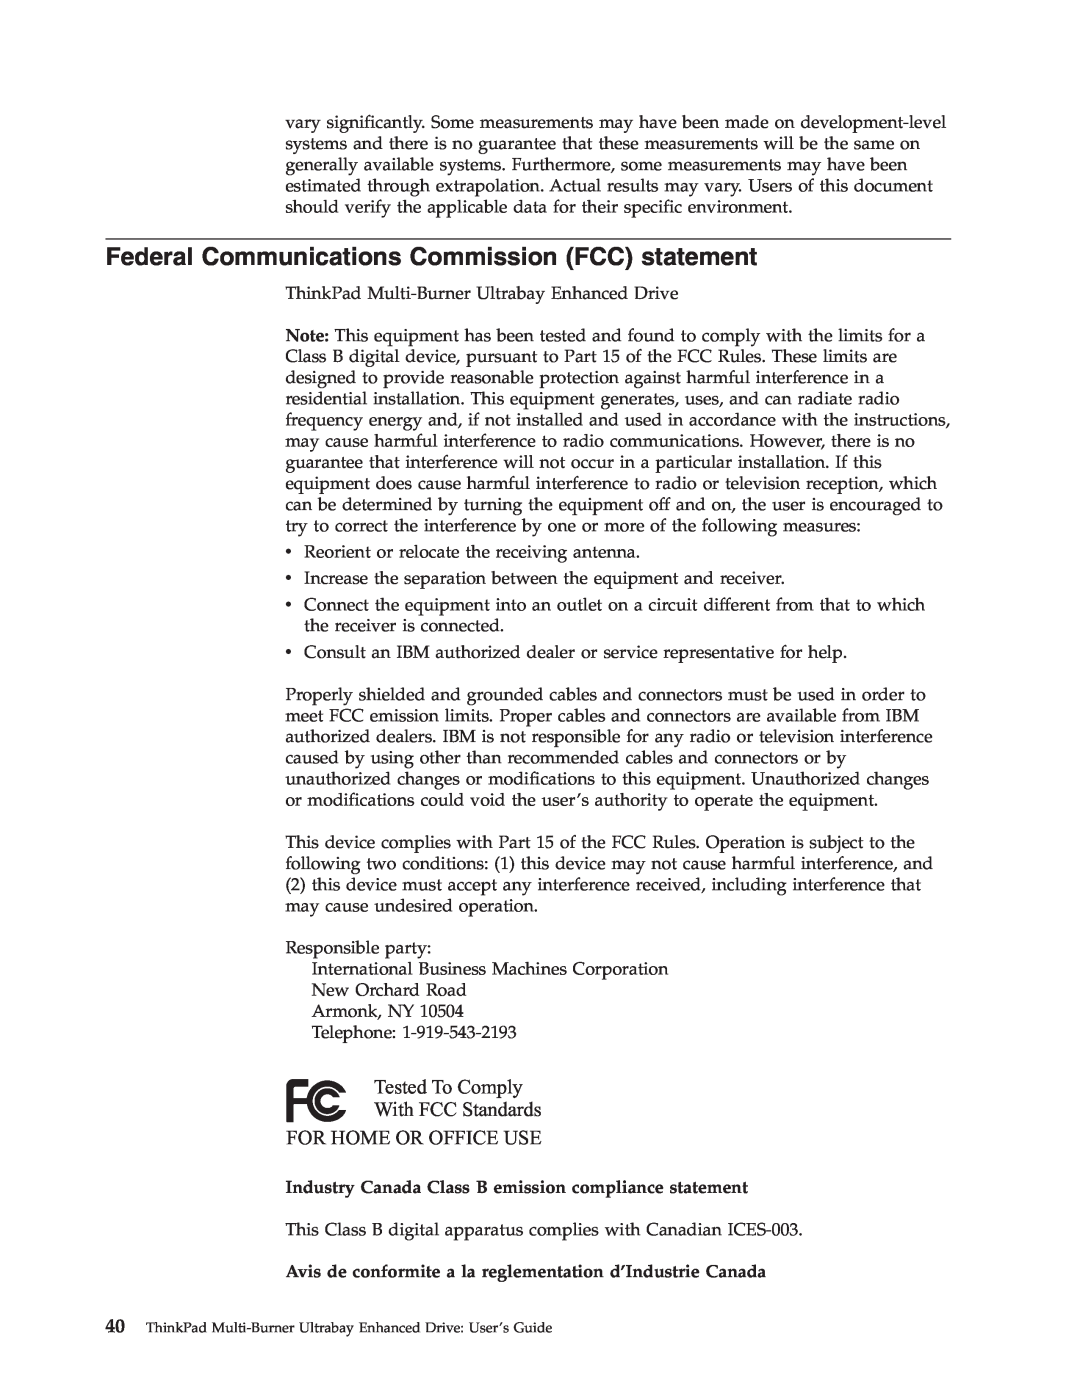 IBM 73P3279 manual Federal Communications Commission FCC statement, Industry Canada Class B emission compliance statement 